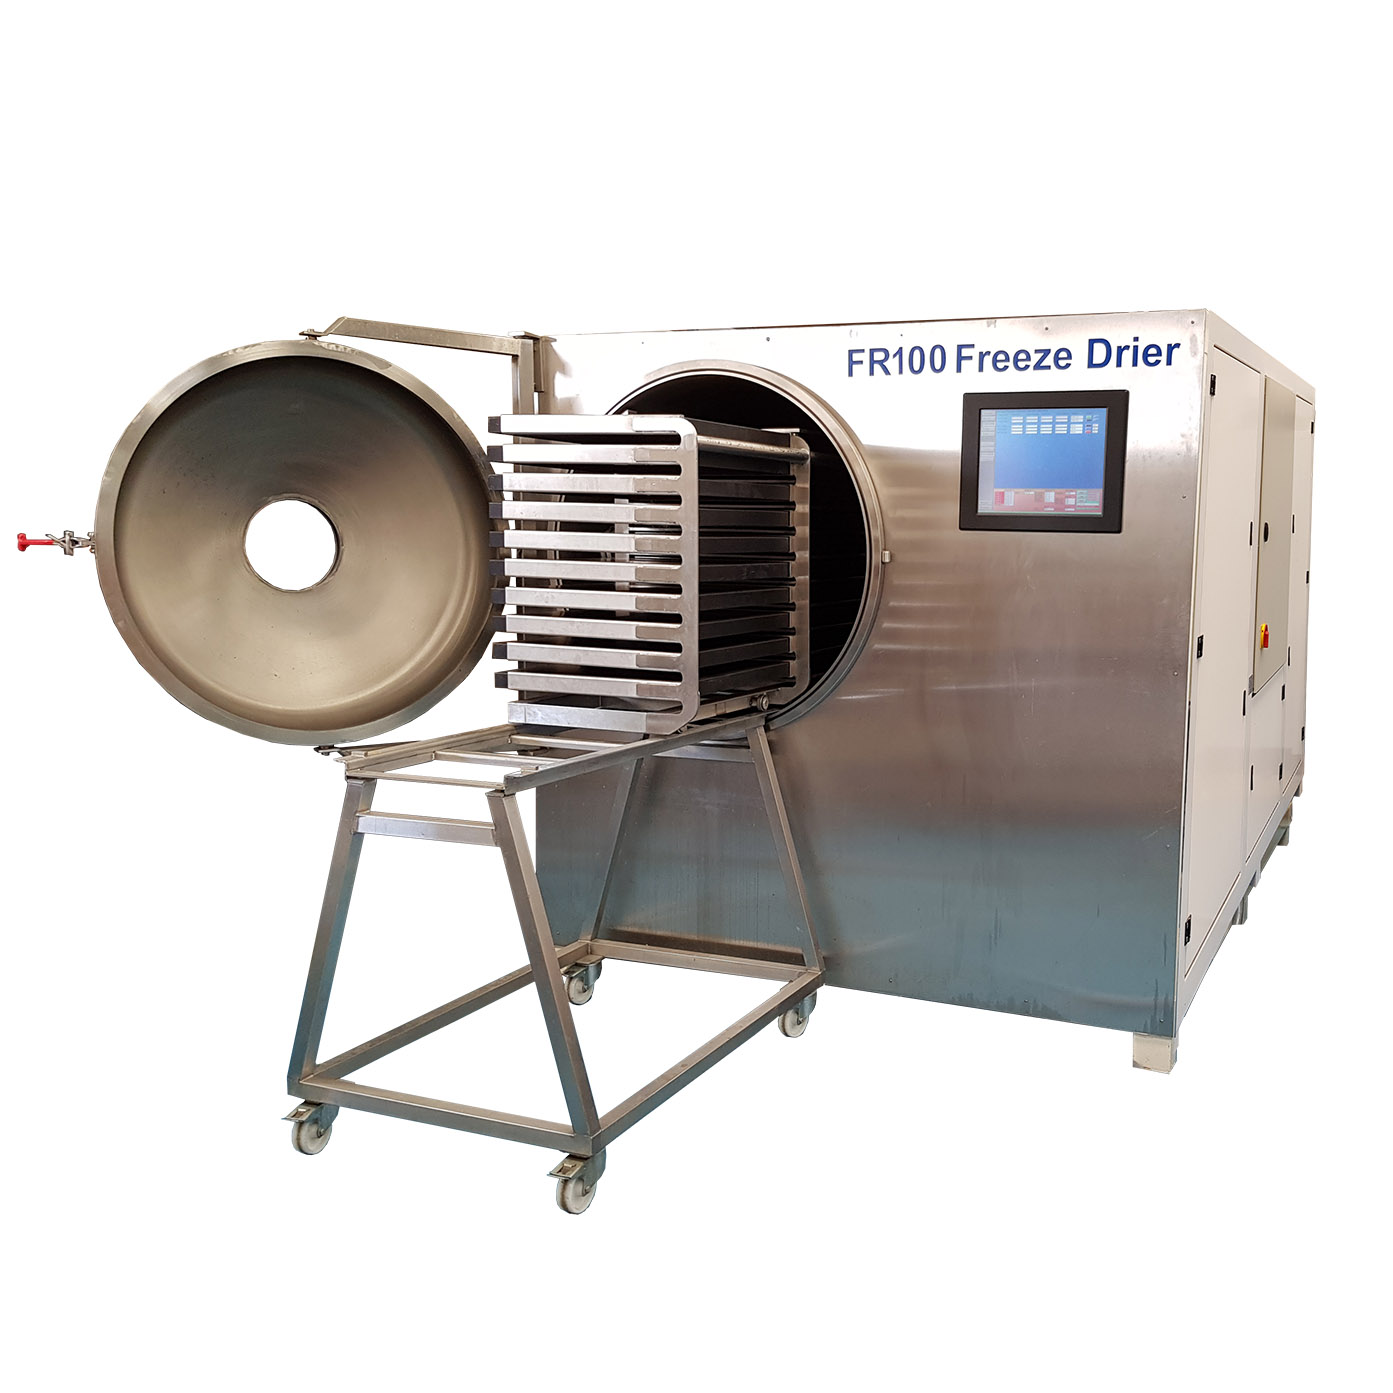 FR50 freeze drier with product loading trolley